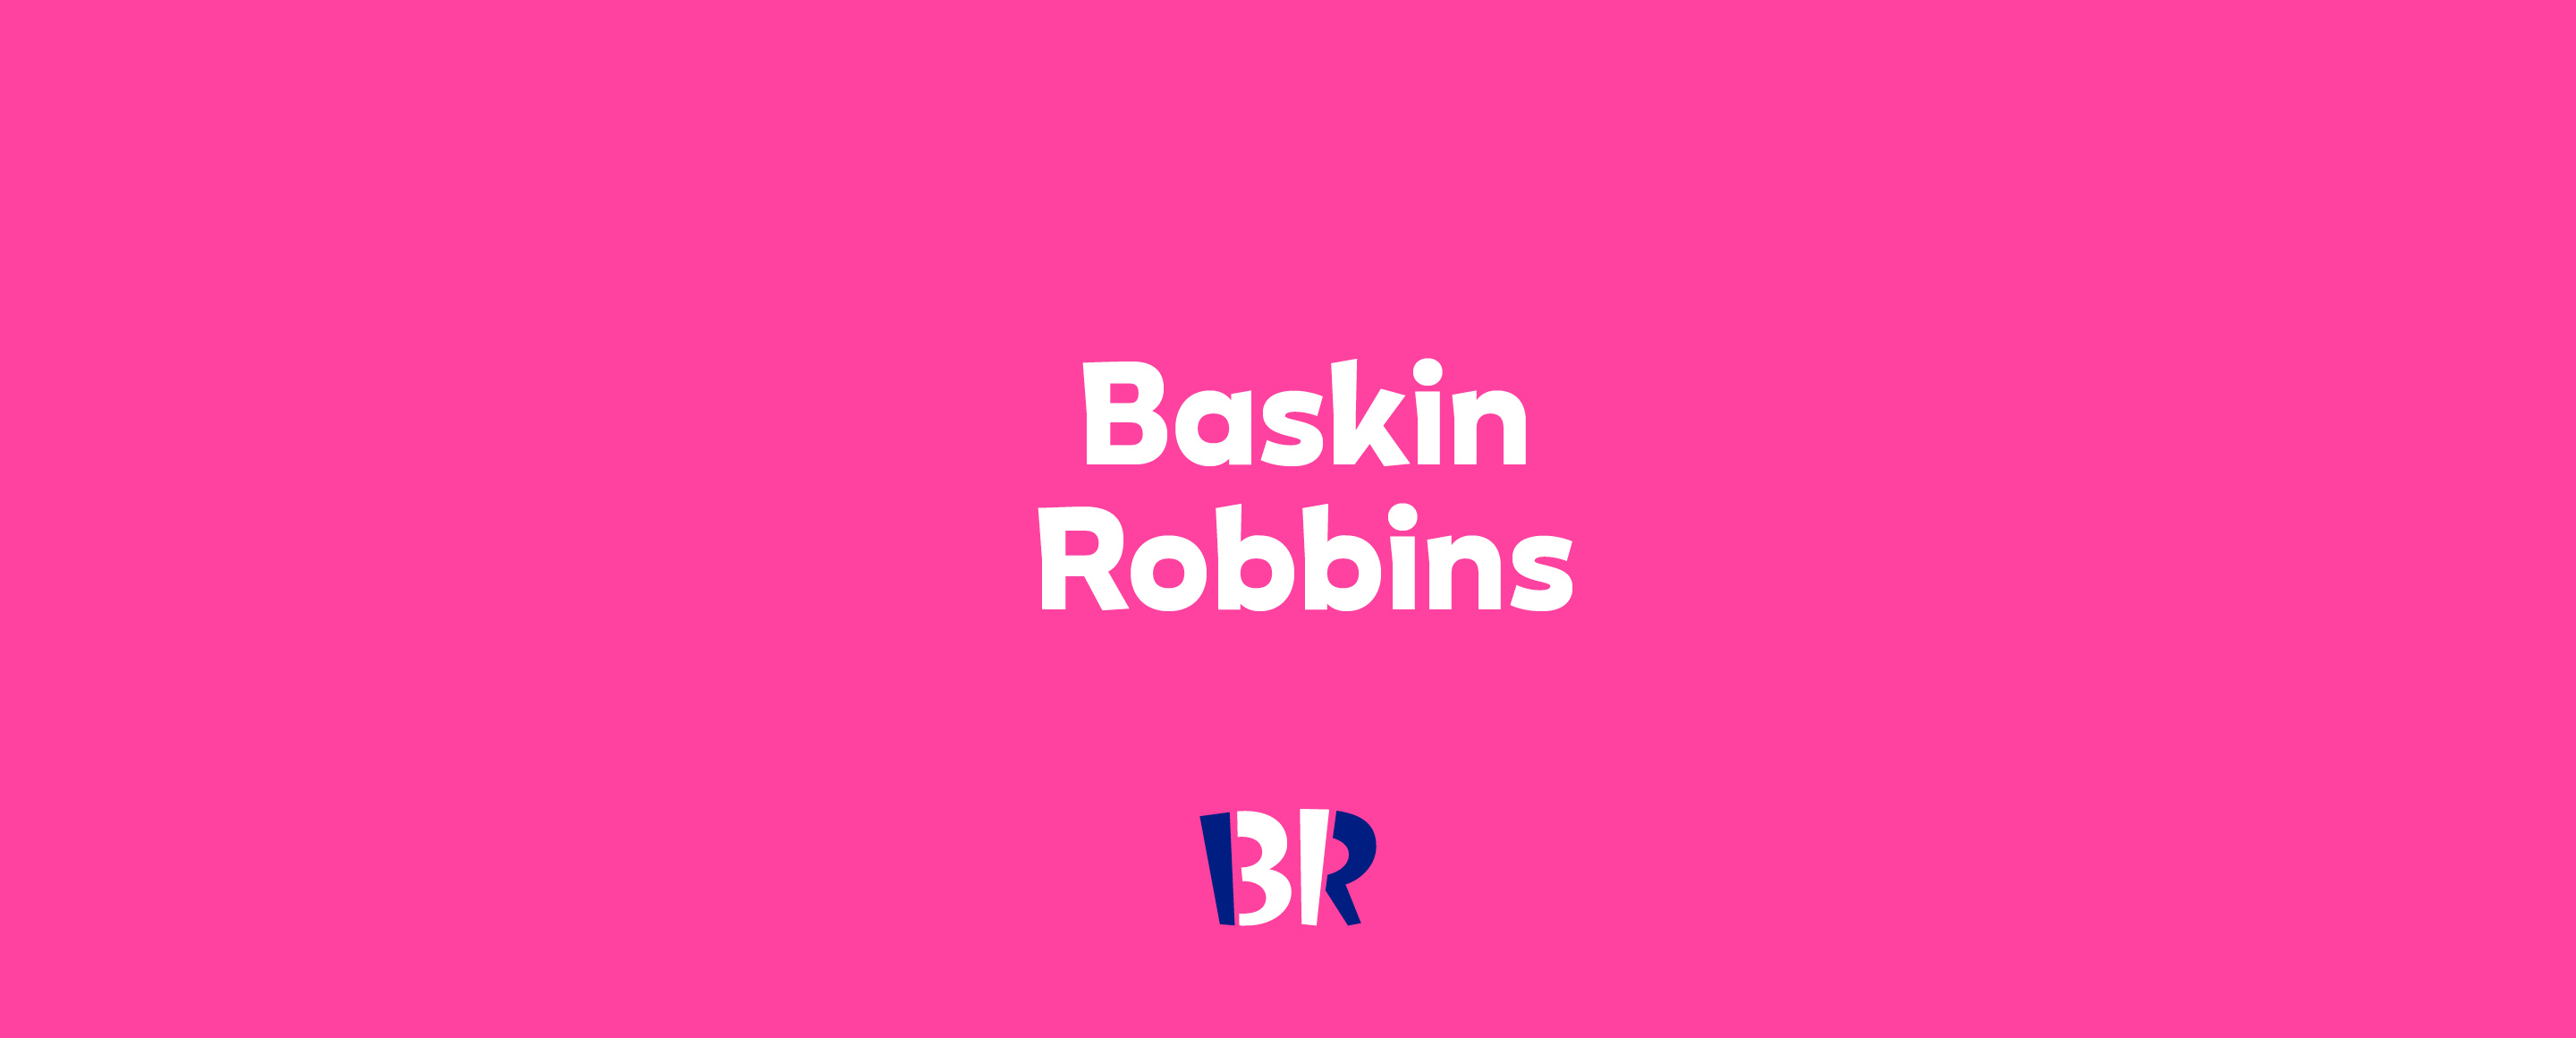 Baskin Robbins: The world's largest chain of ice cream specialty shops, Logo. 2880x1160 Dual Screen Background.